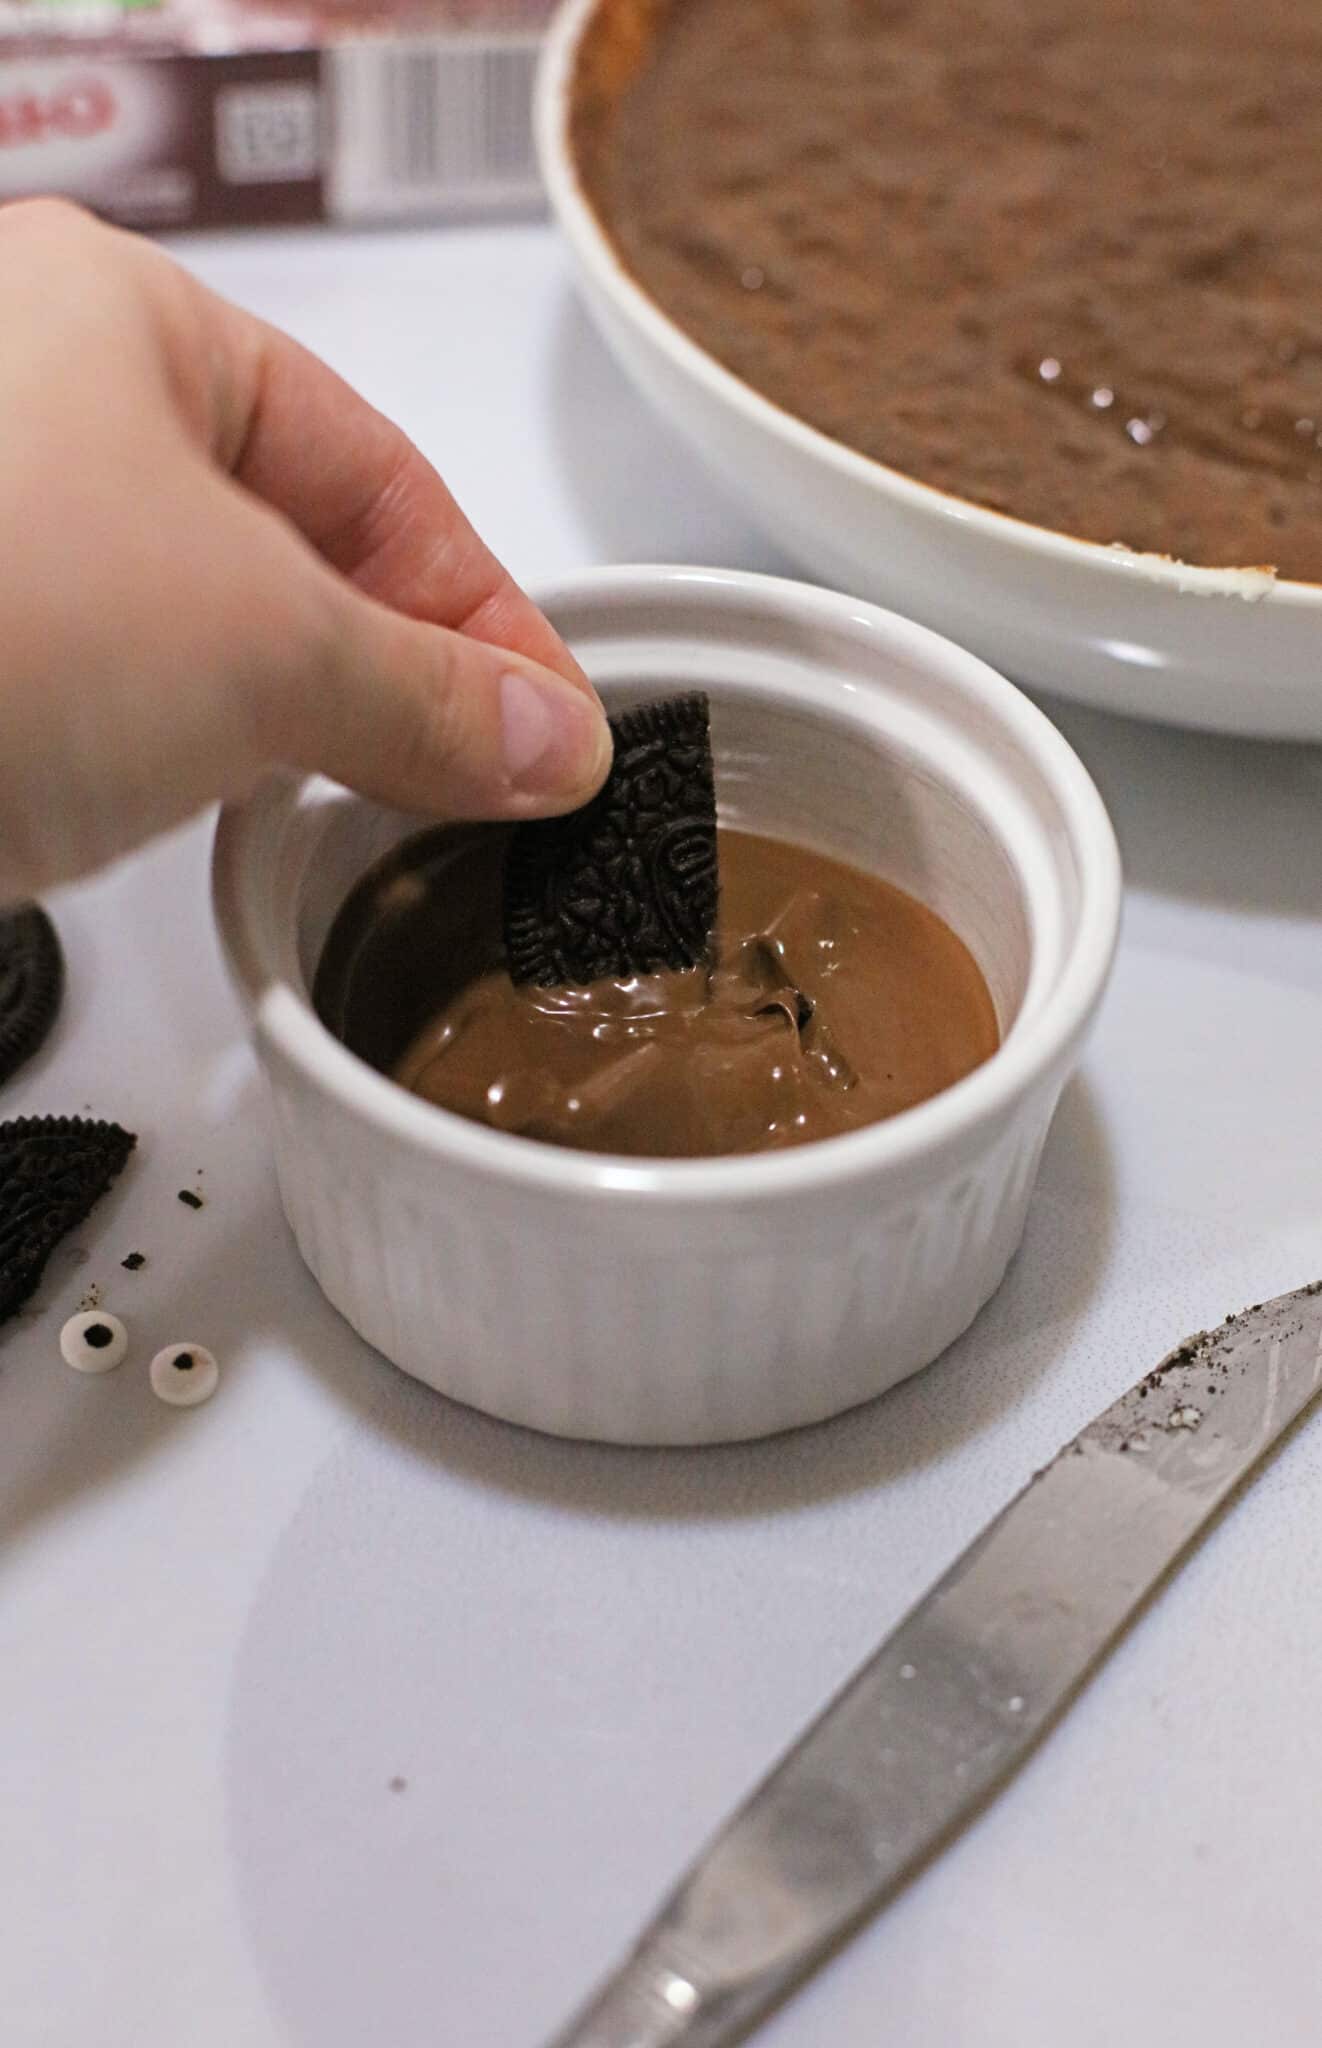 Dipping the Oreo in chocolate.